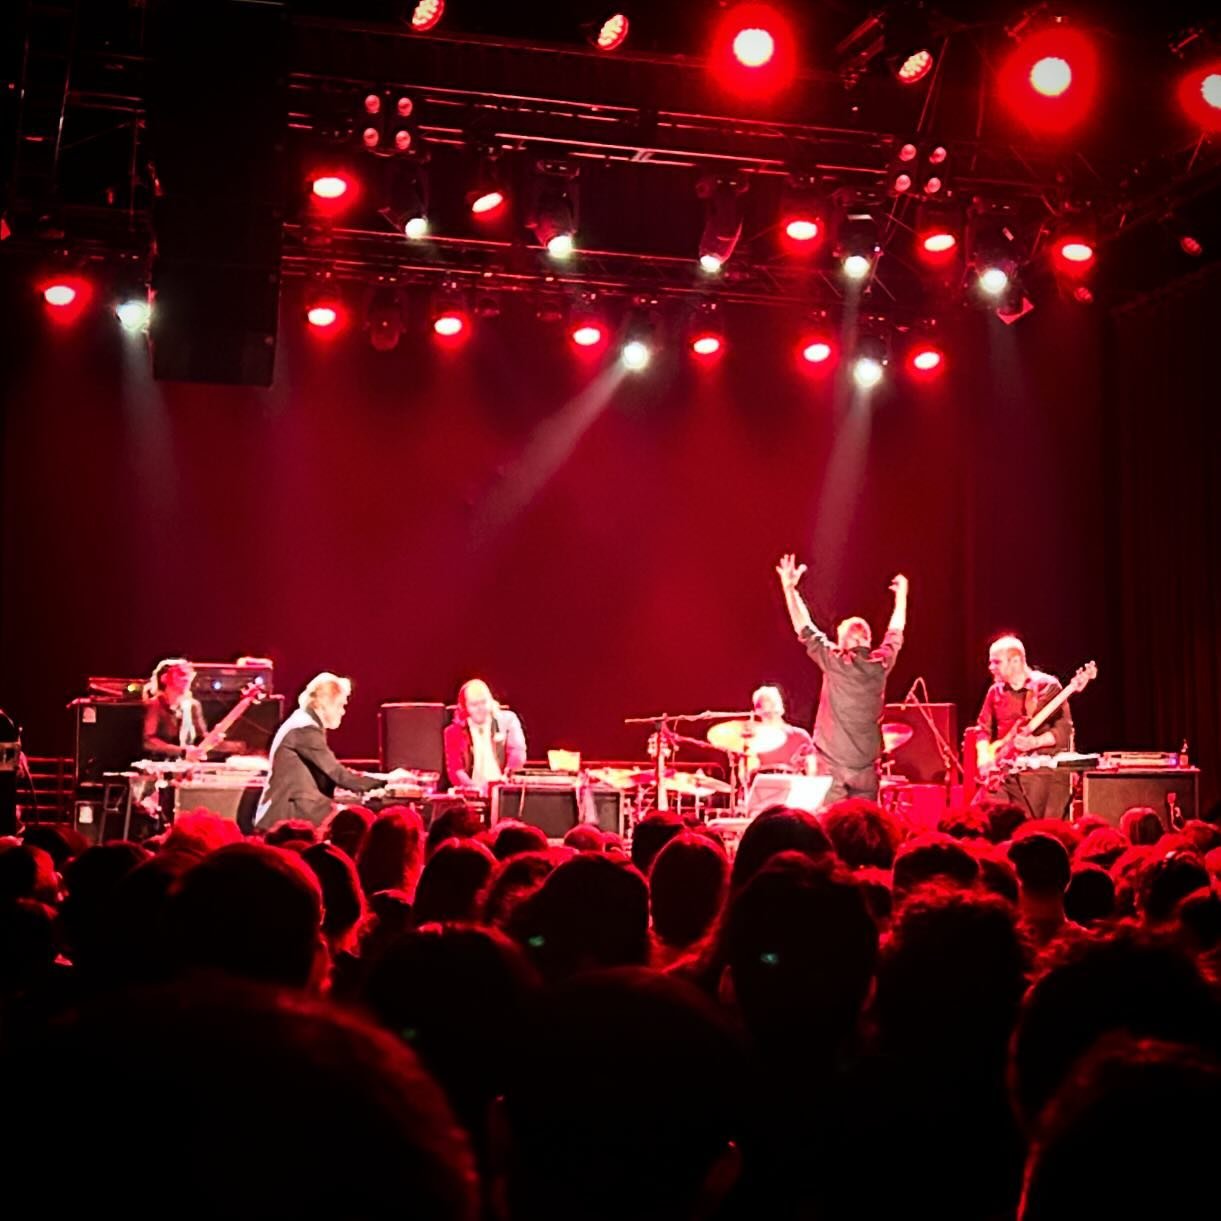 Swans at @uniontransfer, 4/13/24
-
#swansband #michaelgira #uniontransferphilly #phillyconcerts